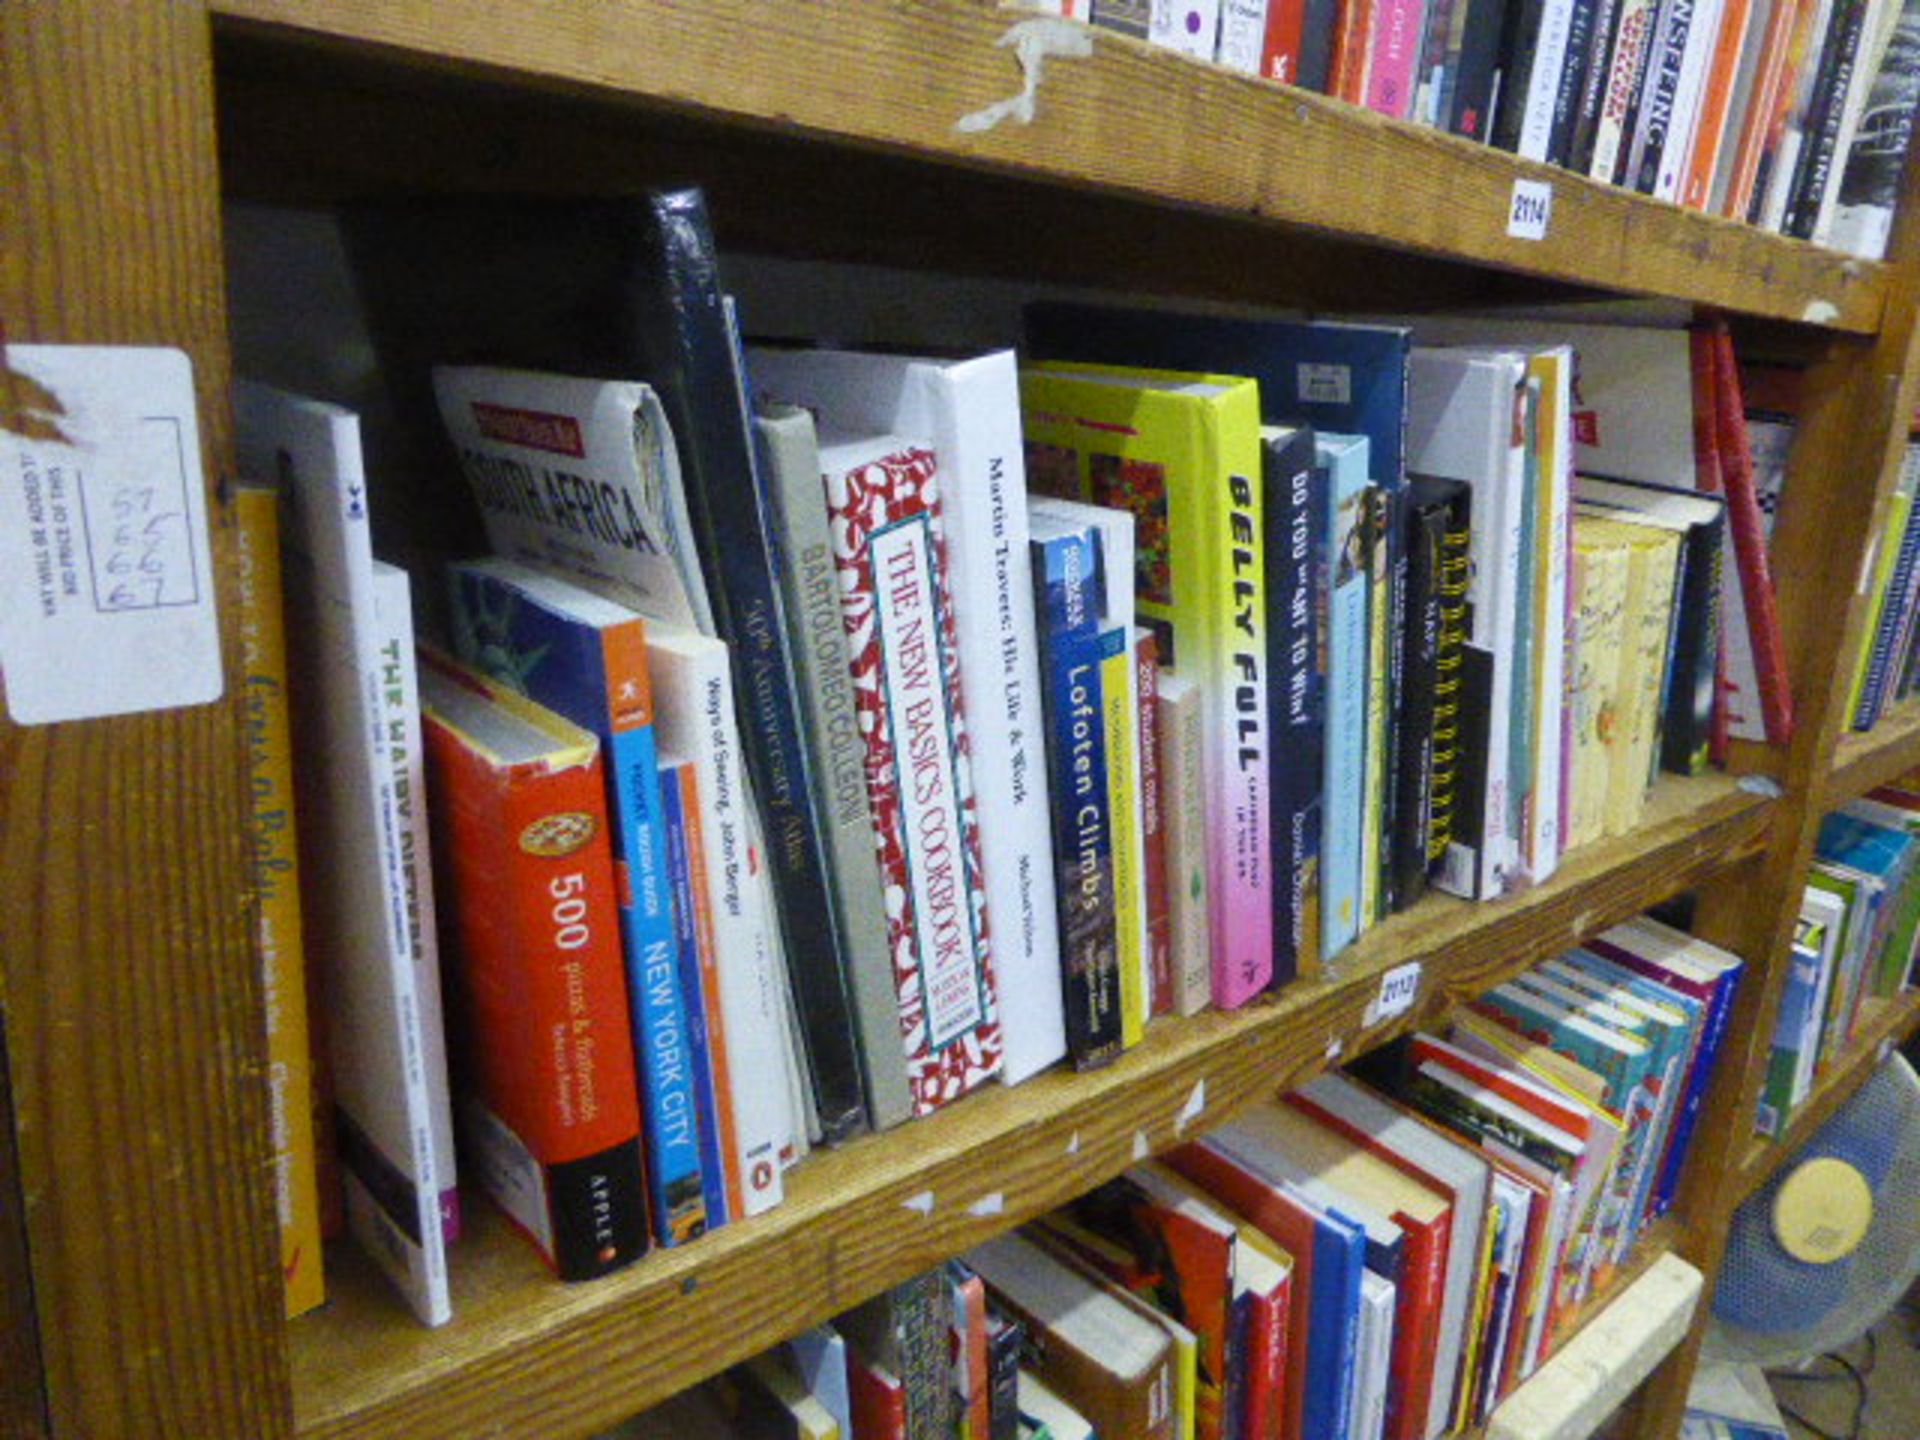 Shelf of books about cooking, travelling, etc